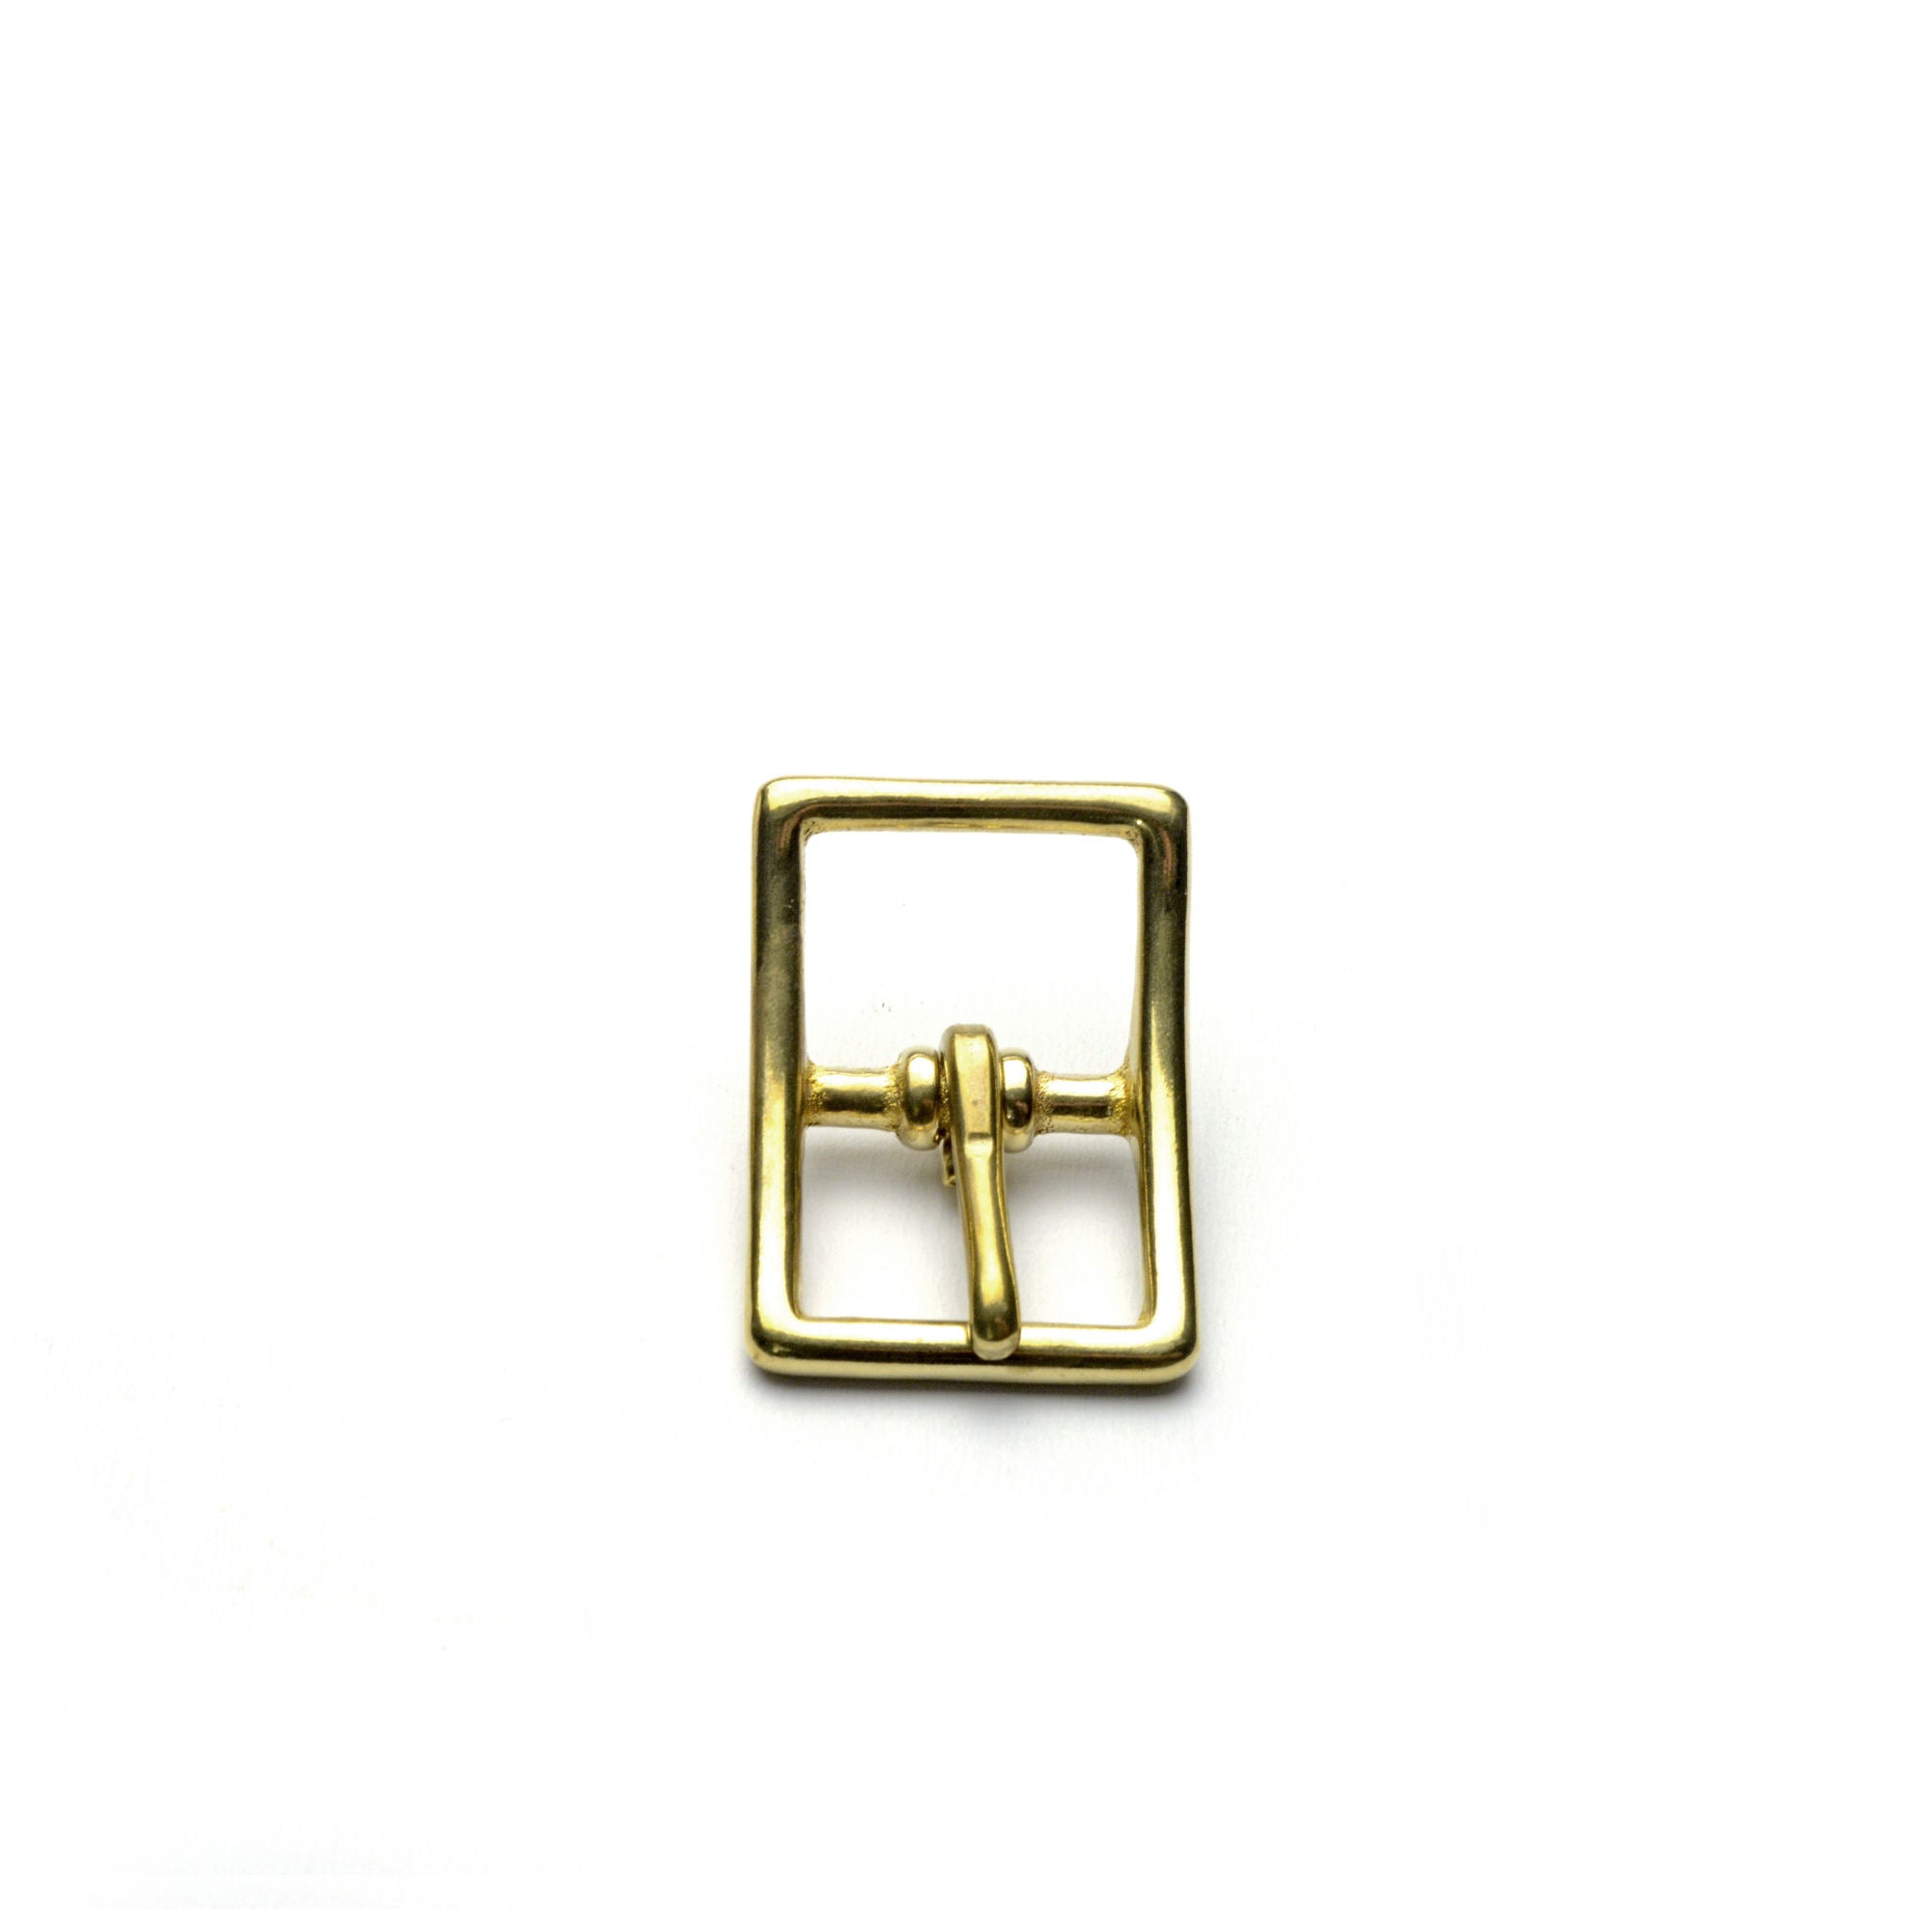 25mm Solid Brass Oblong Buckle from Identity Leathercraft